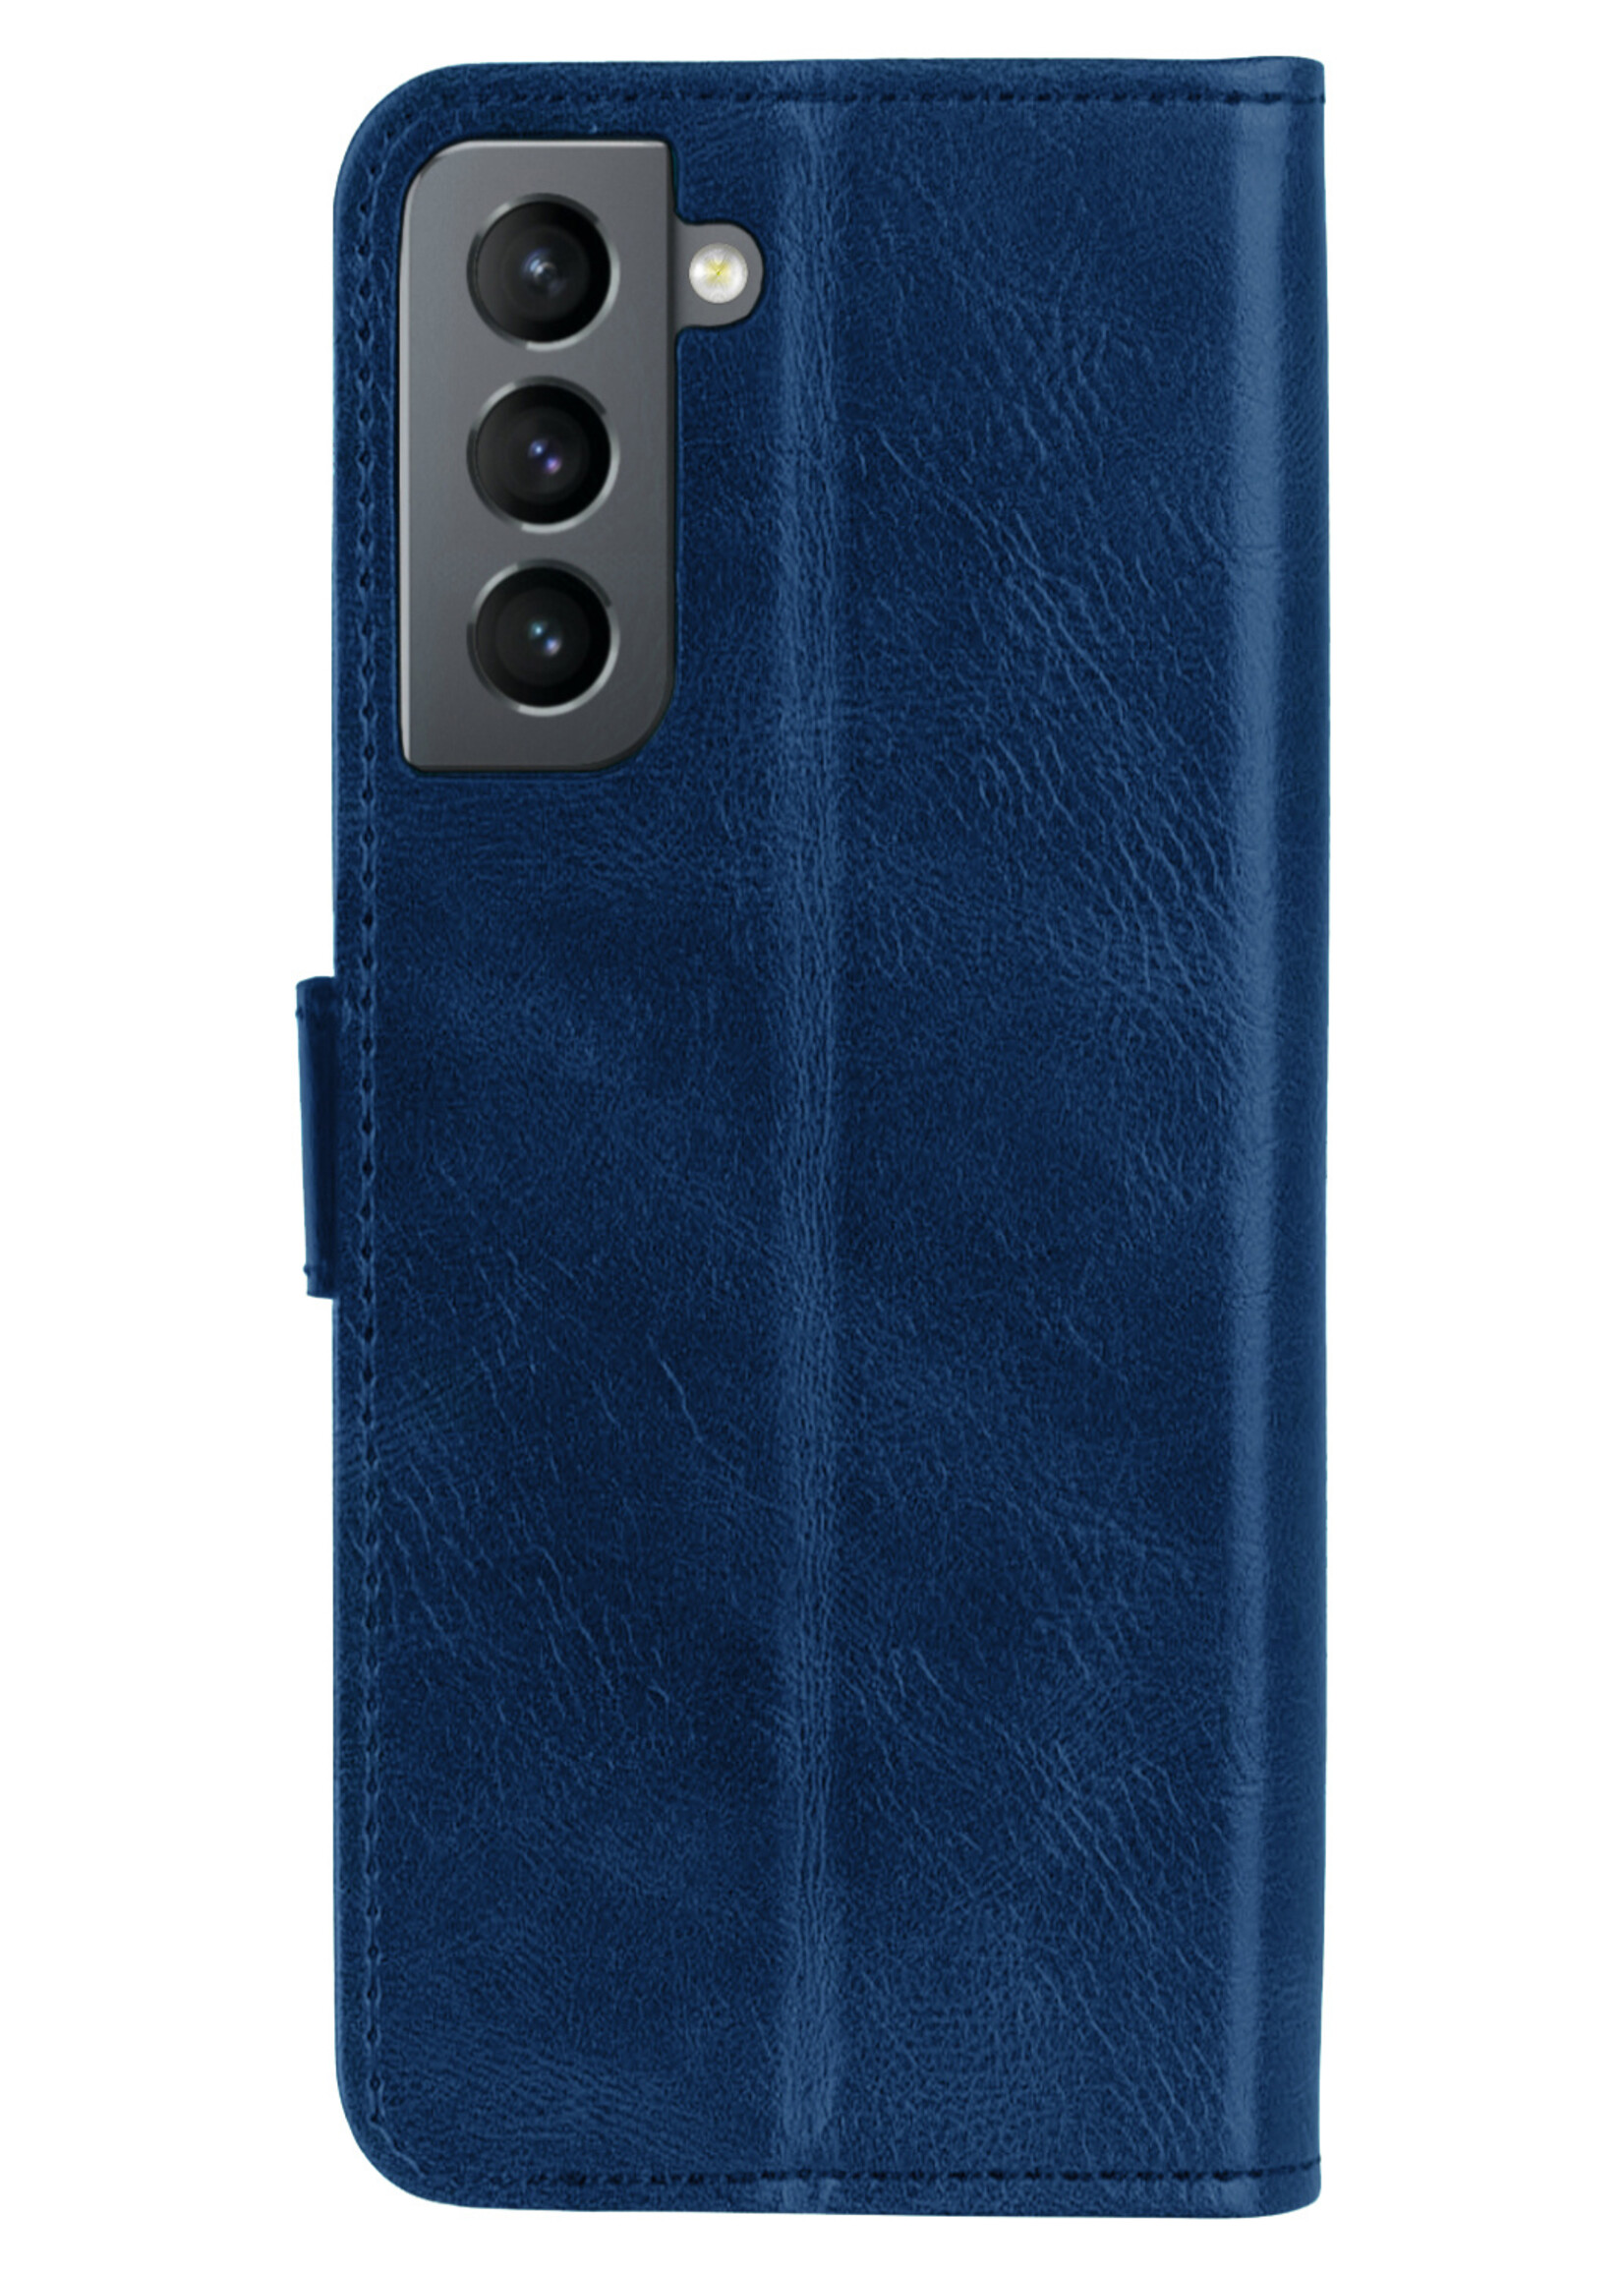 BTH Samsung S22 Hoesje Book Case Hoes Portemonnee Cover Walletcase - Samsung S22 Hoes Bookcase Hoesje - Donkerblauw